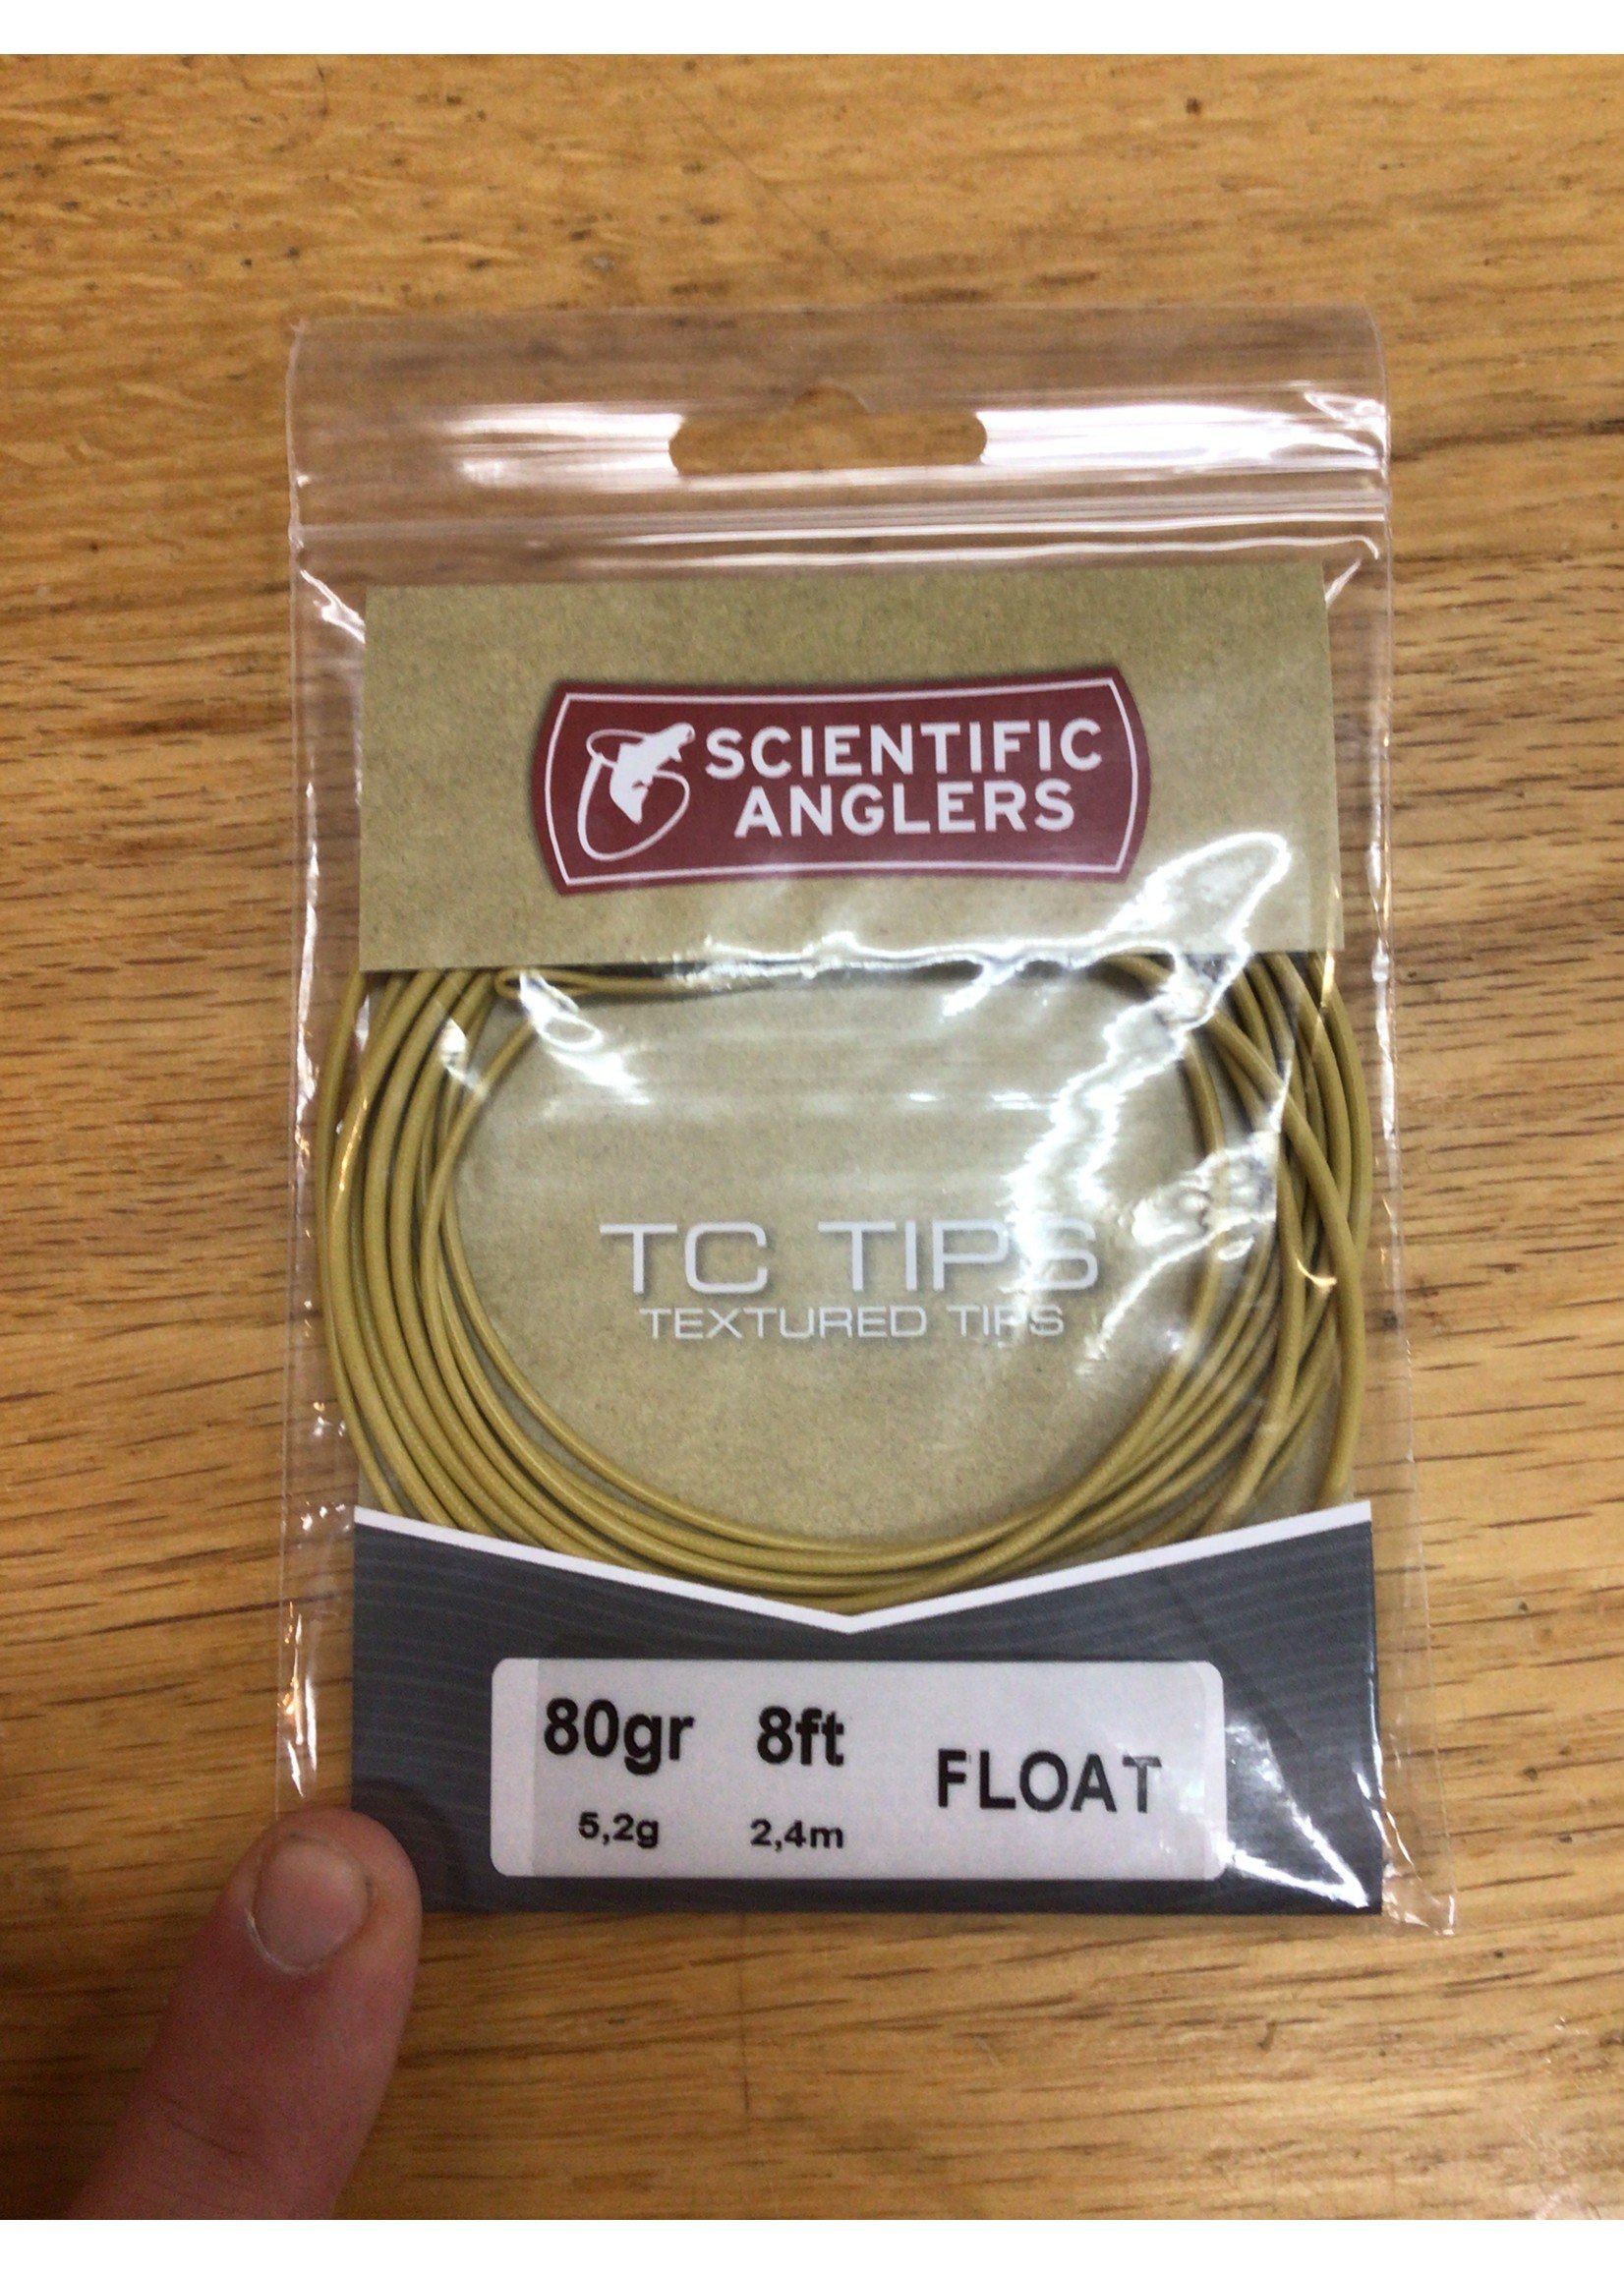 Scientific Anglers Scientific Anglers TC Textured Tips 80gr 8ft